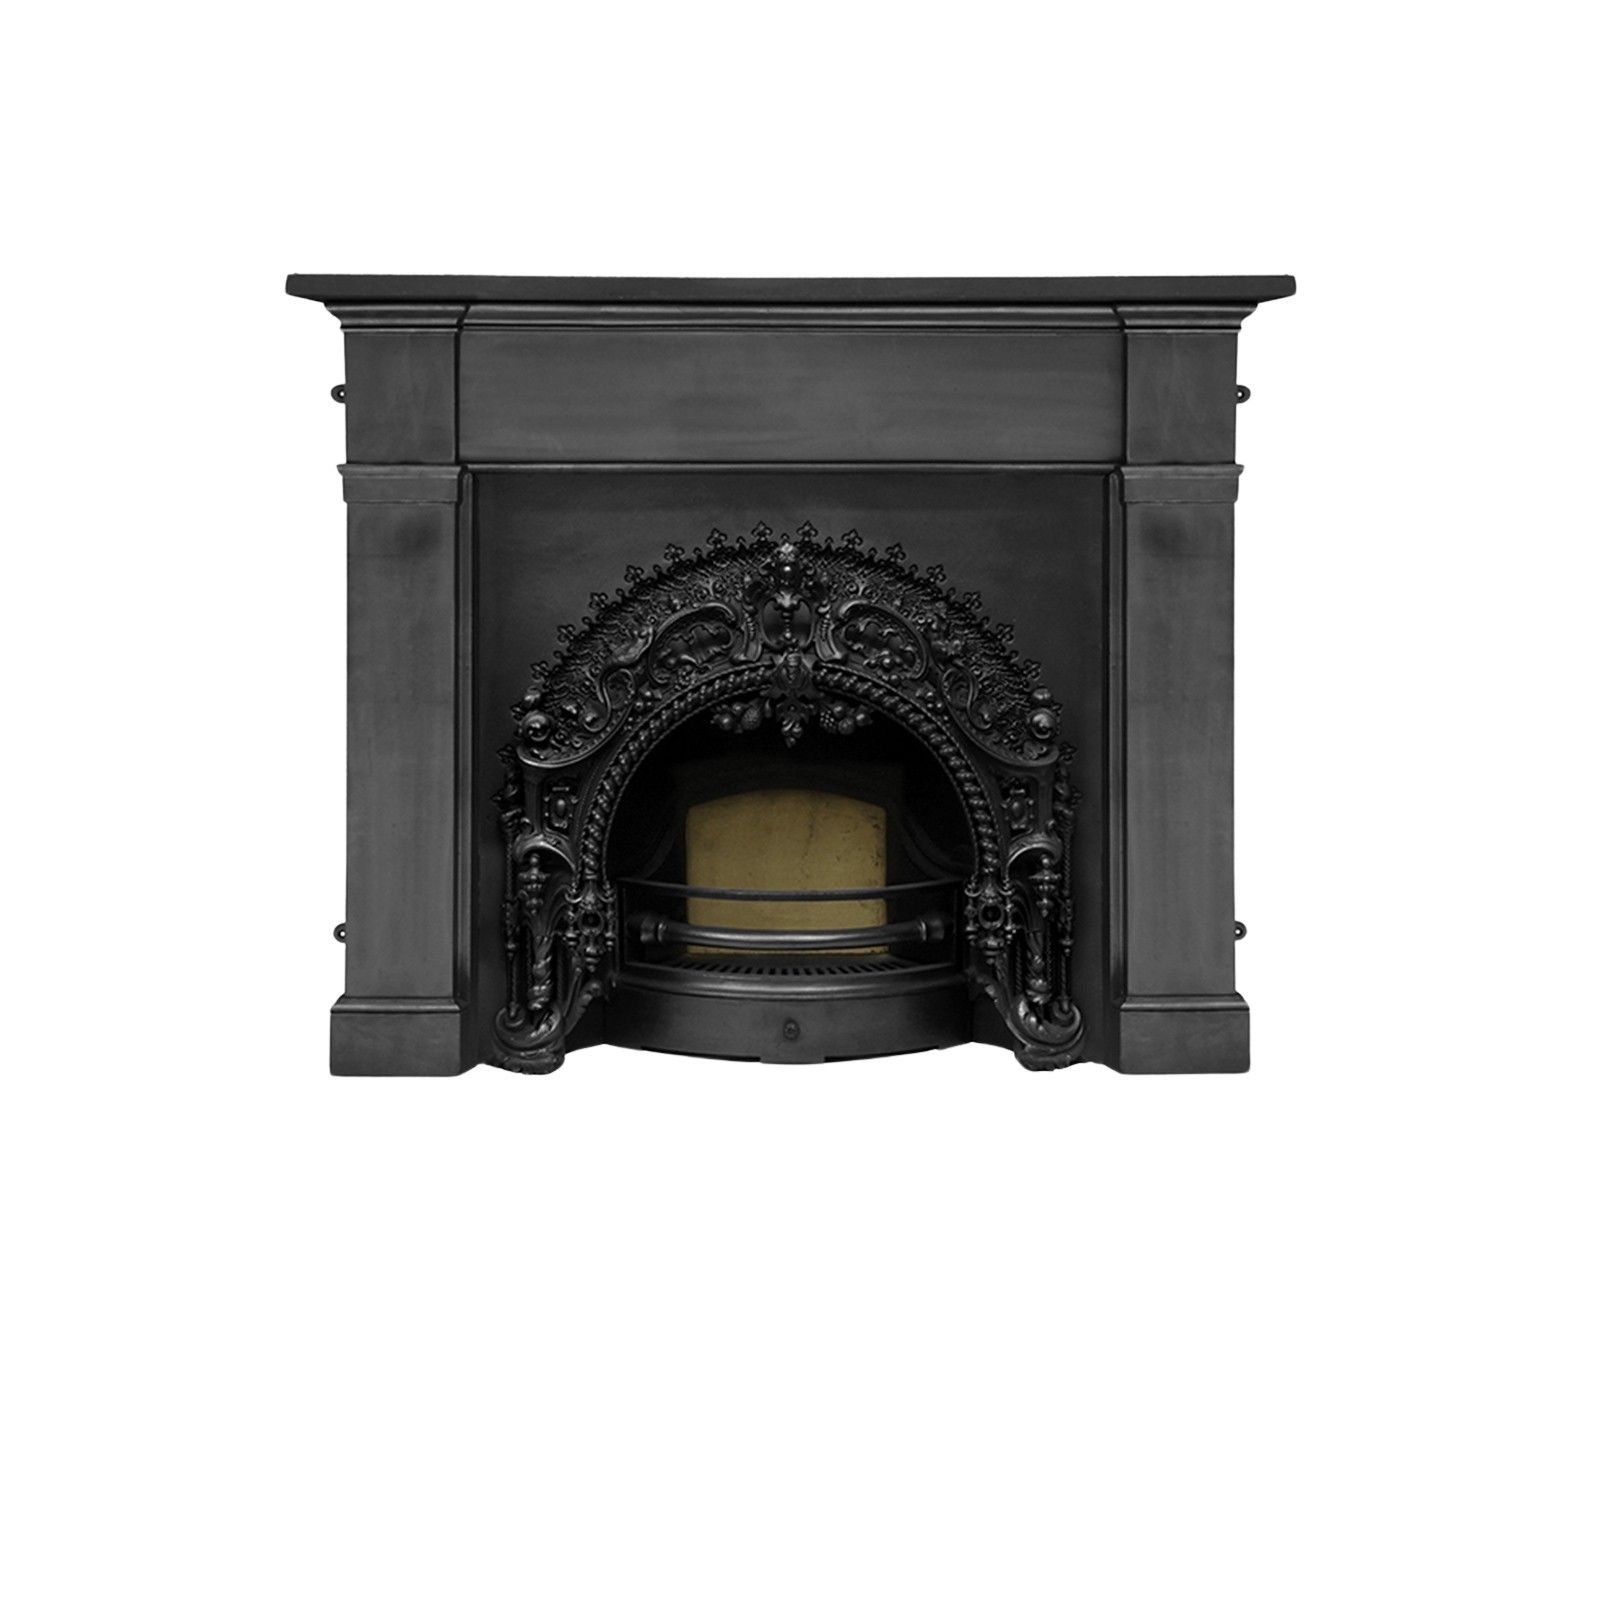 Rococco Fireplace Insert